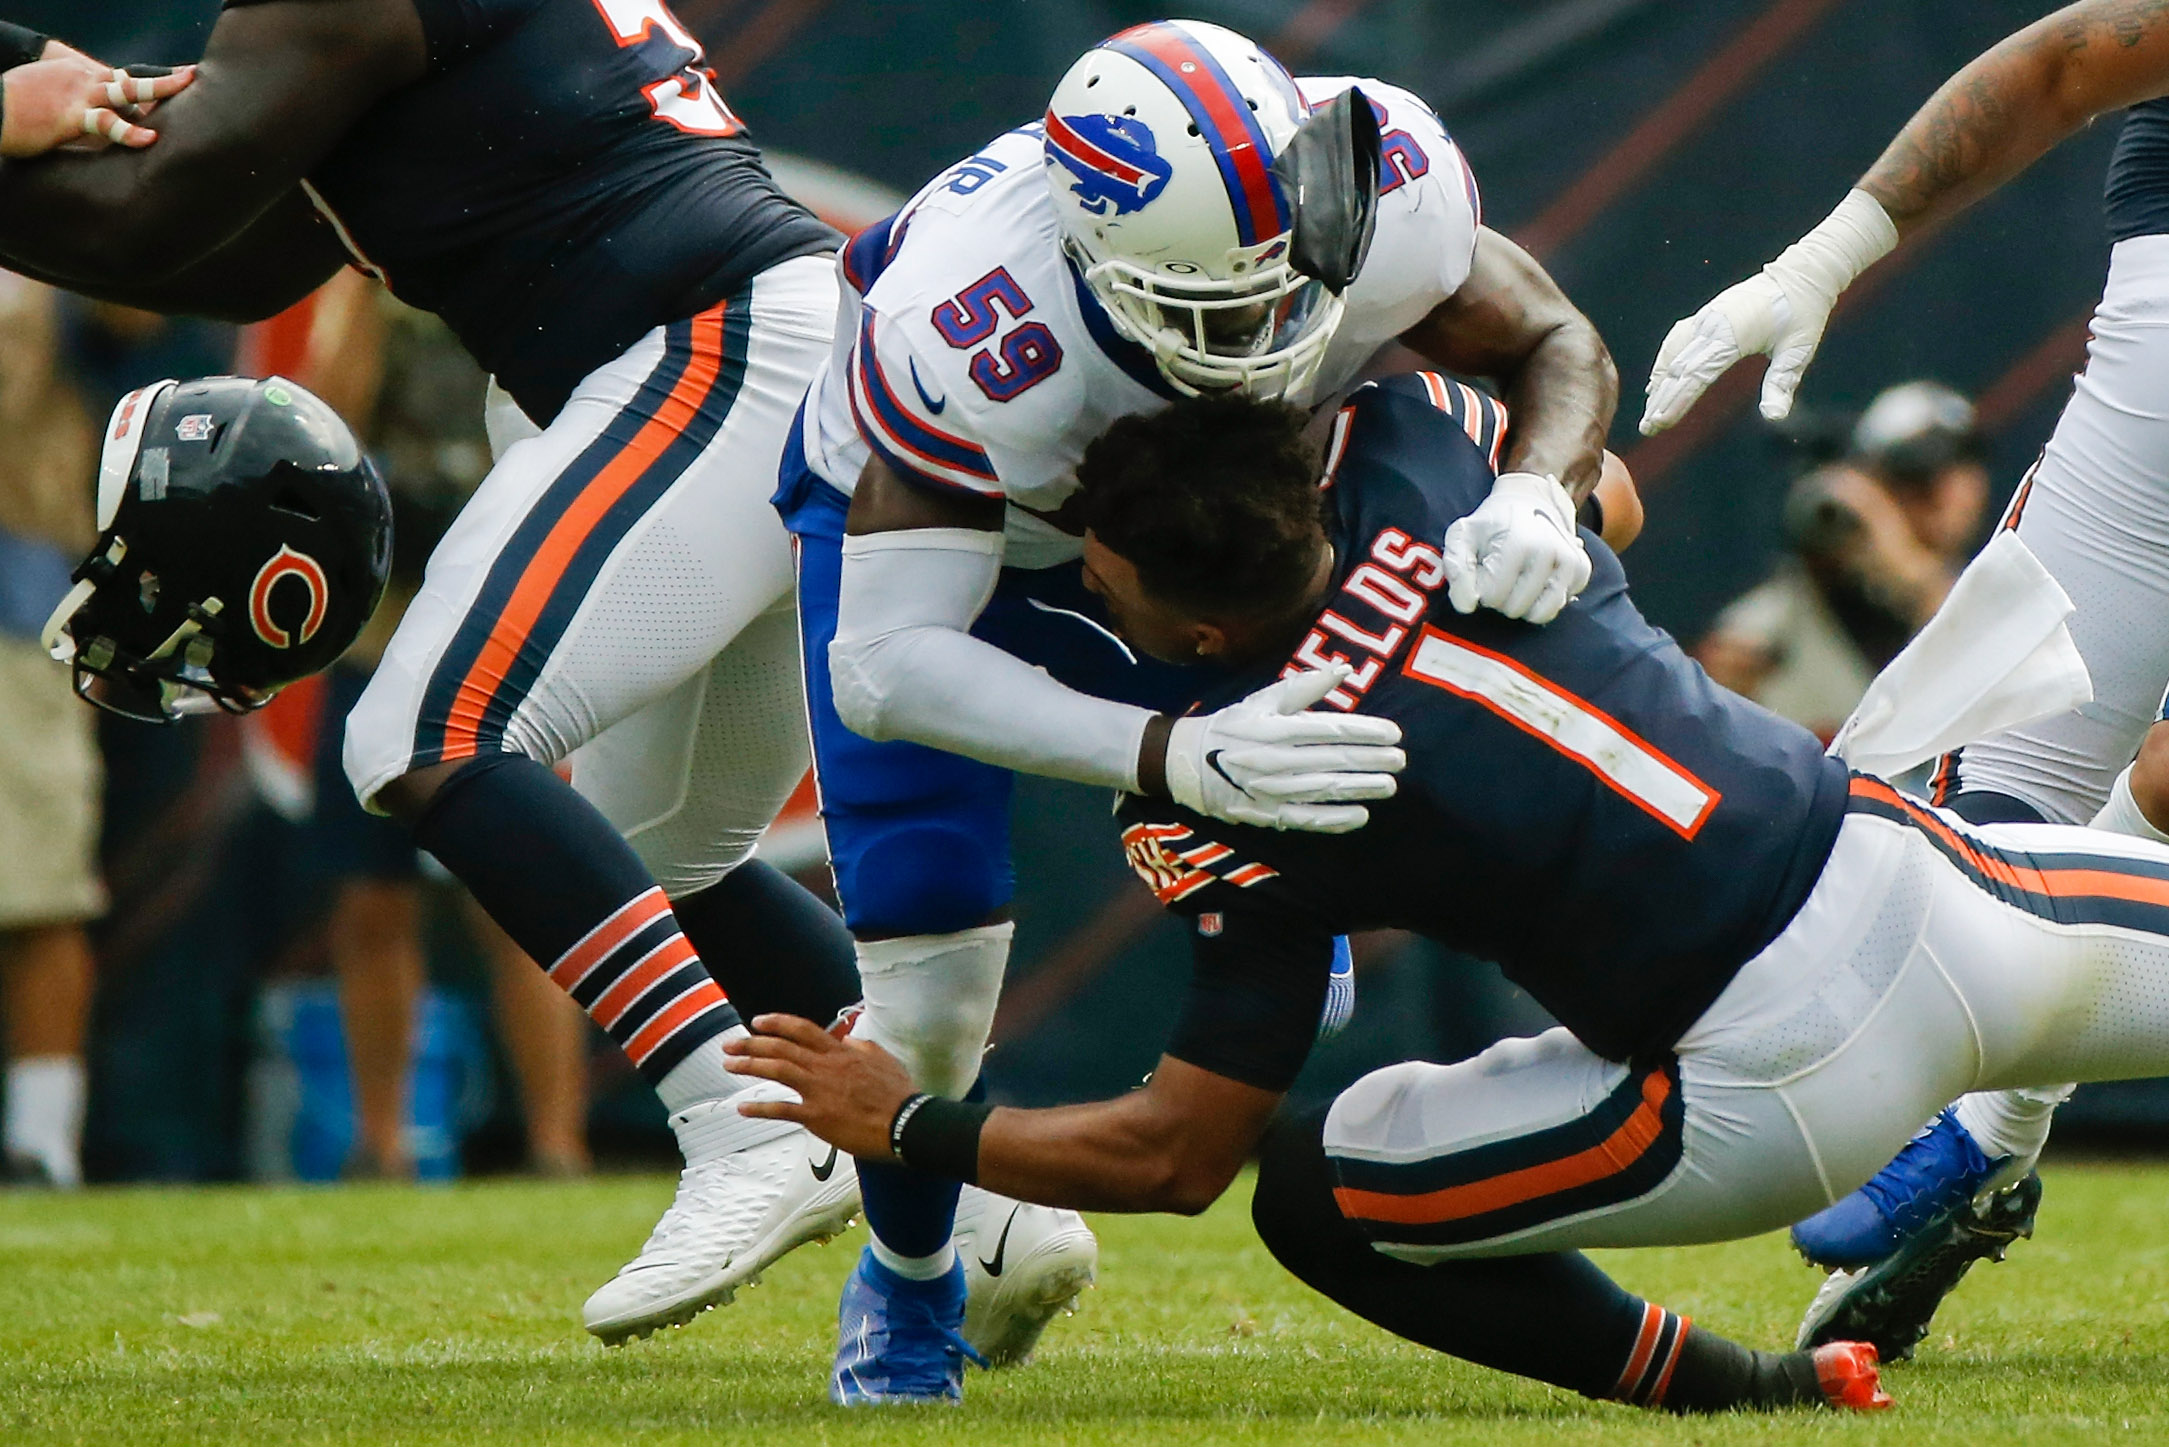 Why Roughing the Passer Is One of the NFL's Most Controversial Rules